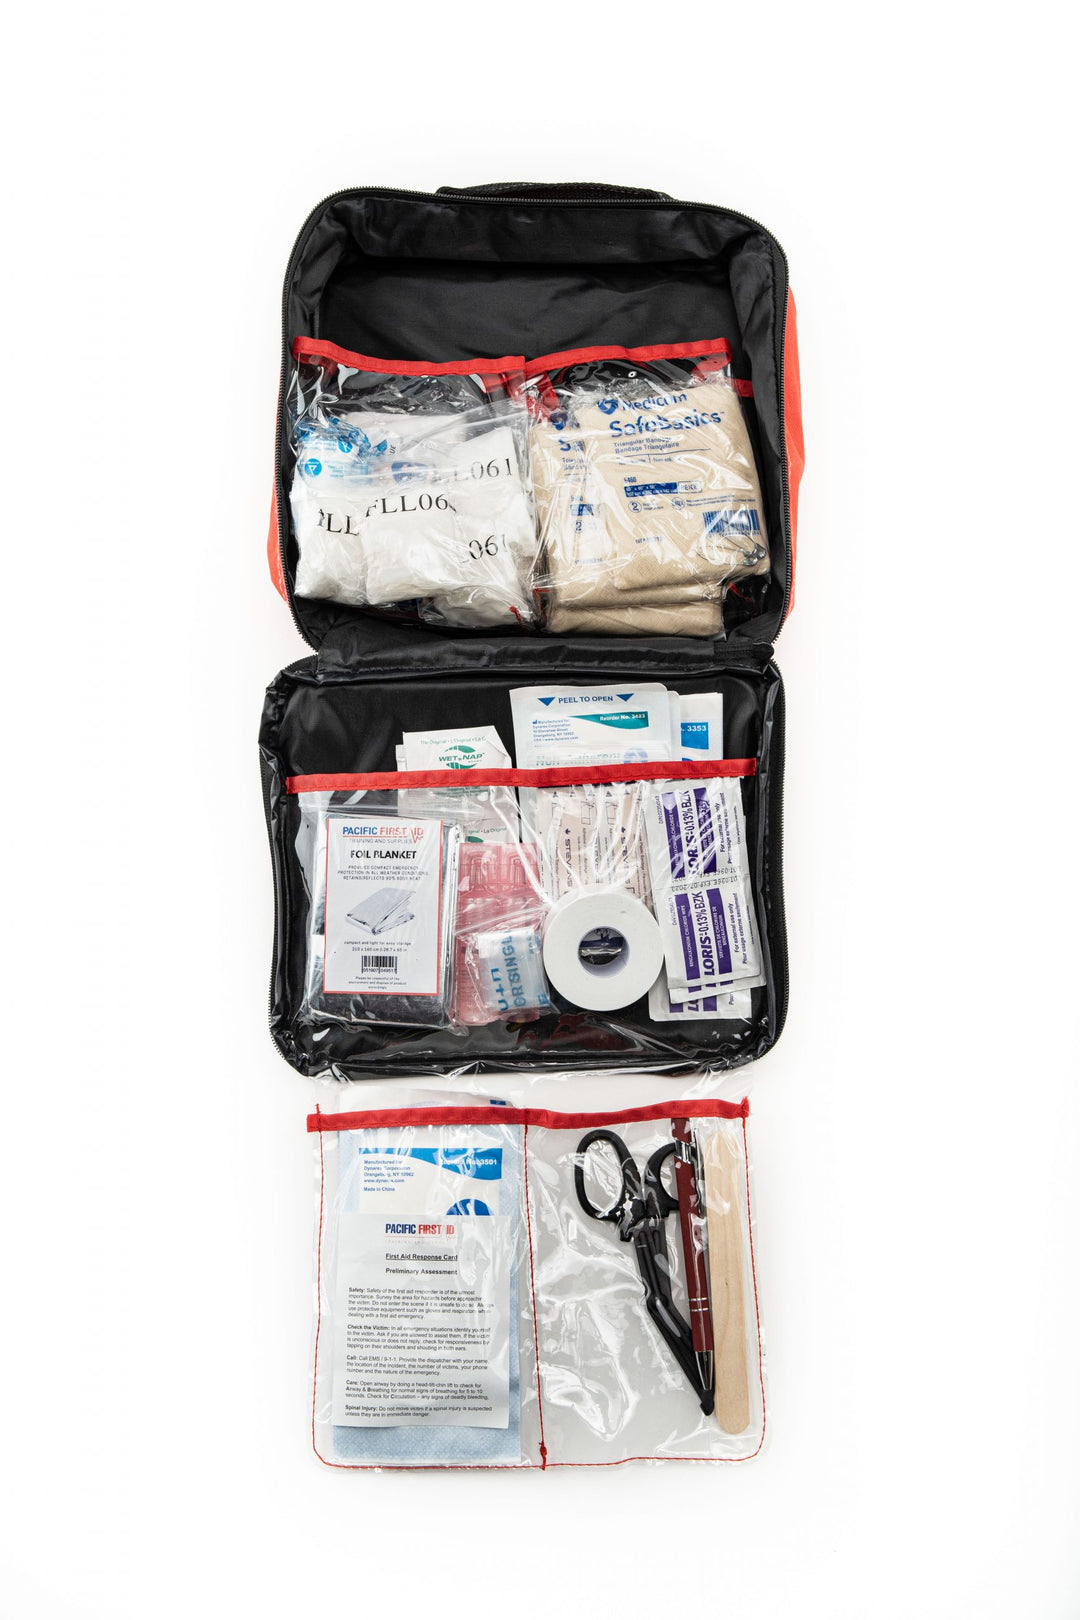 Emergency Sports First Aid Kit